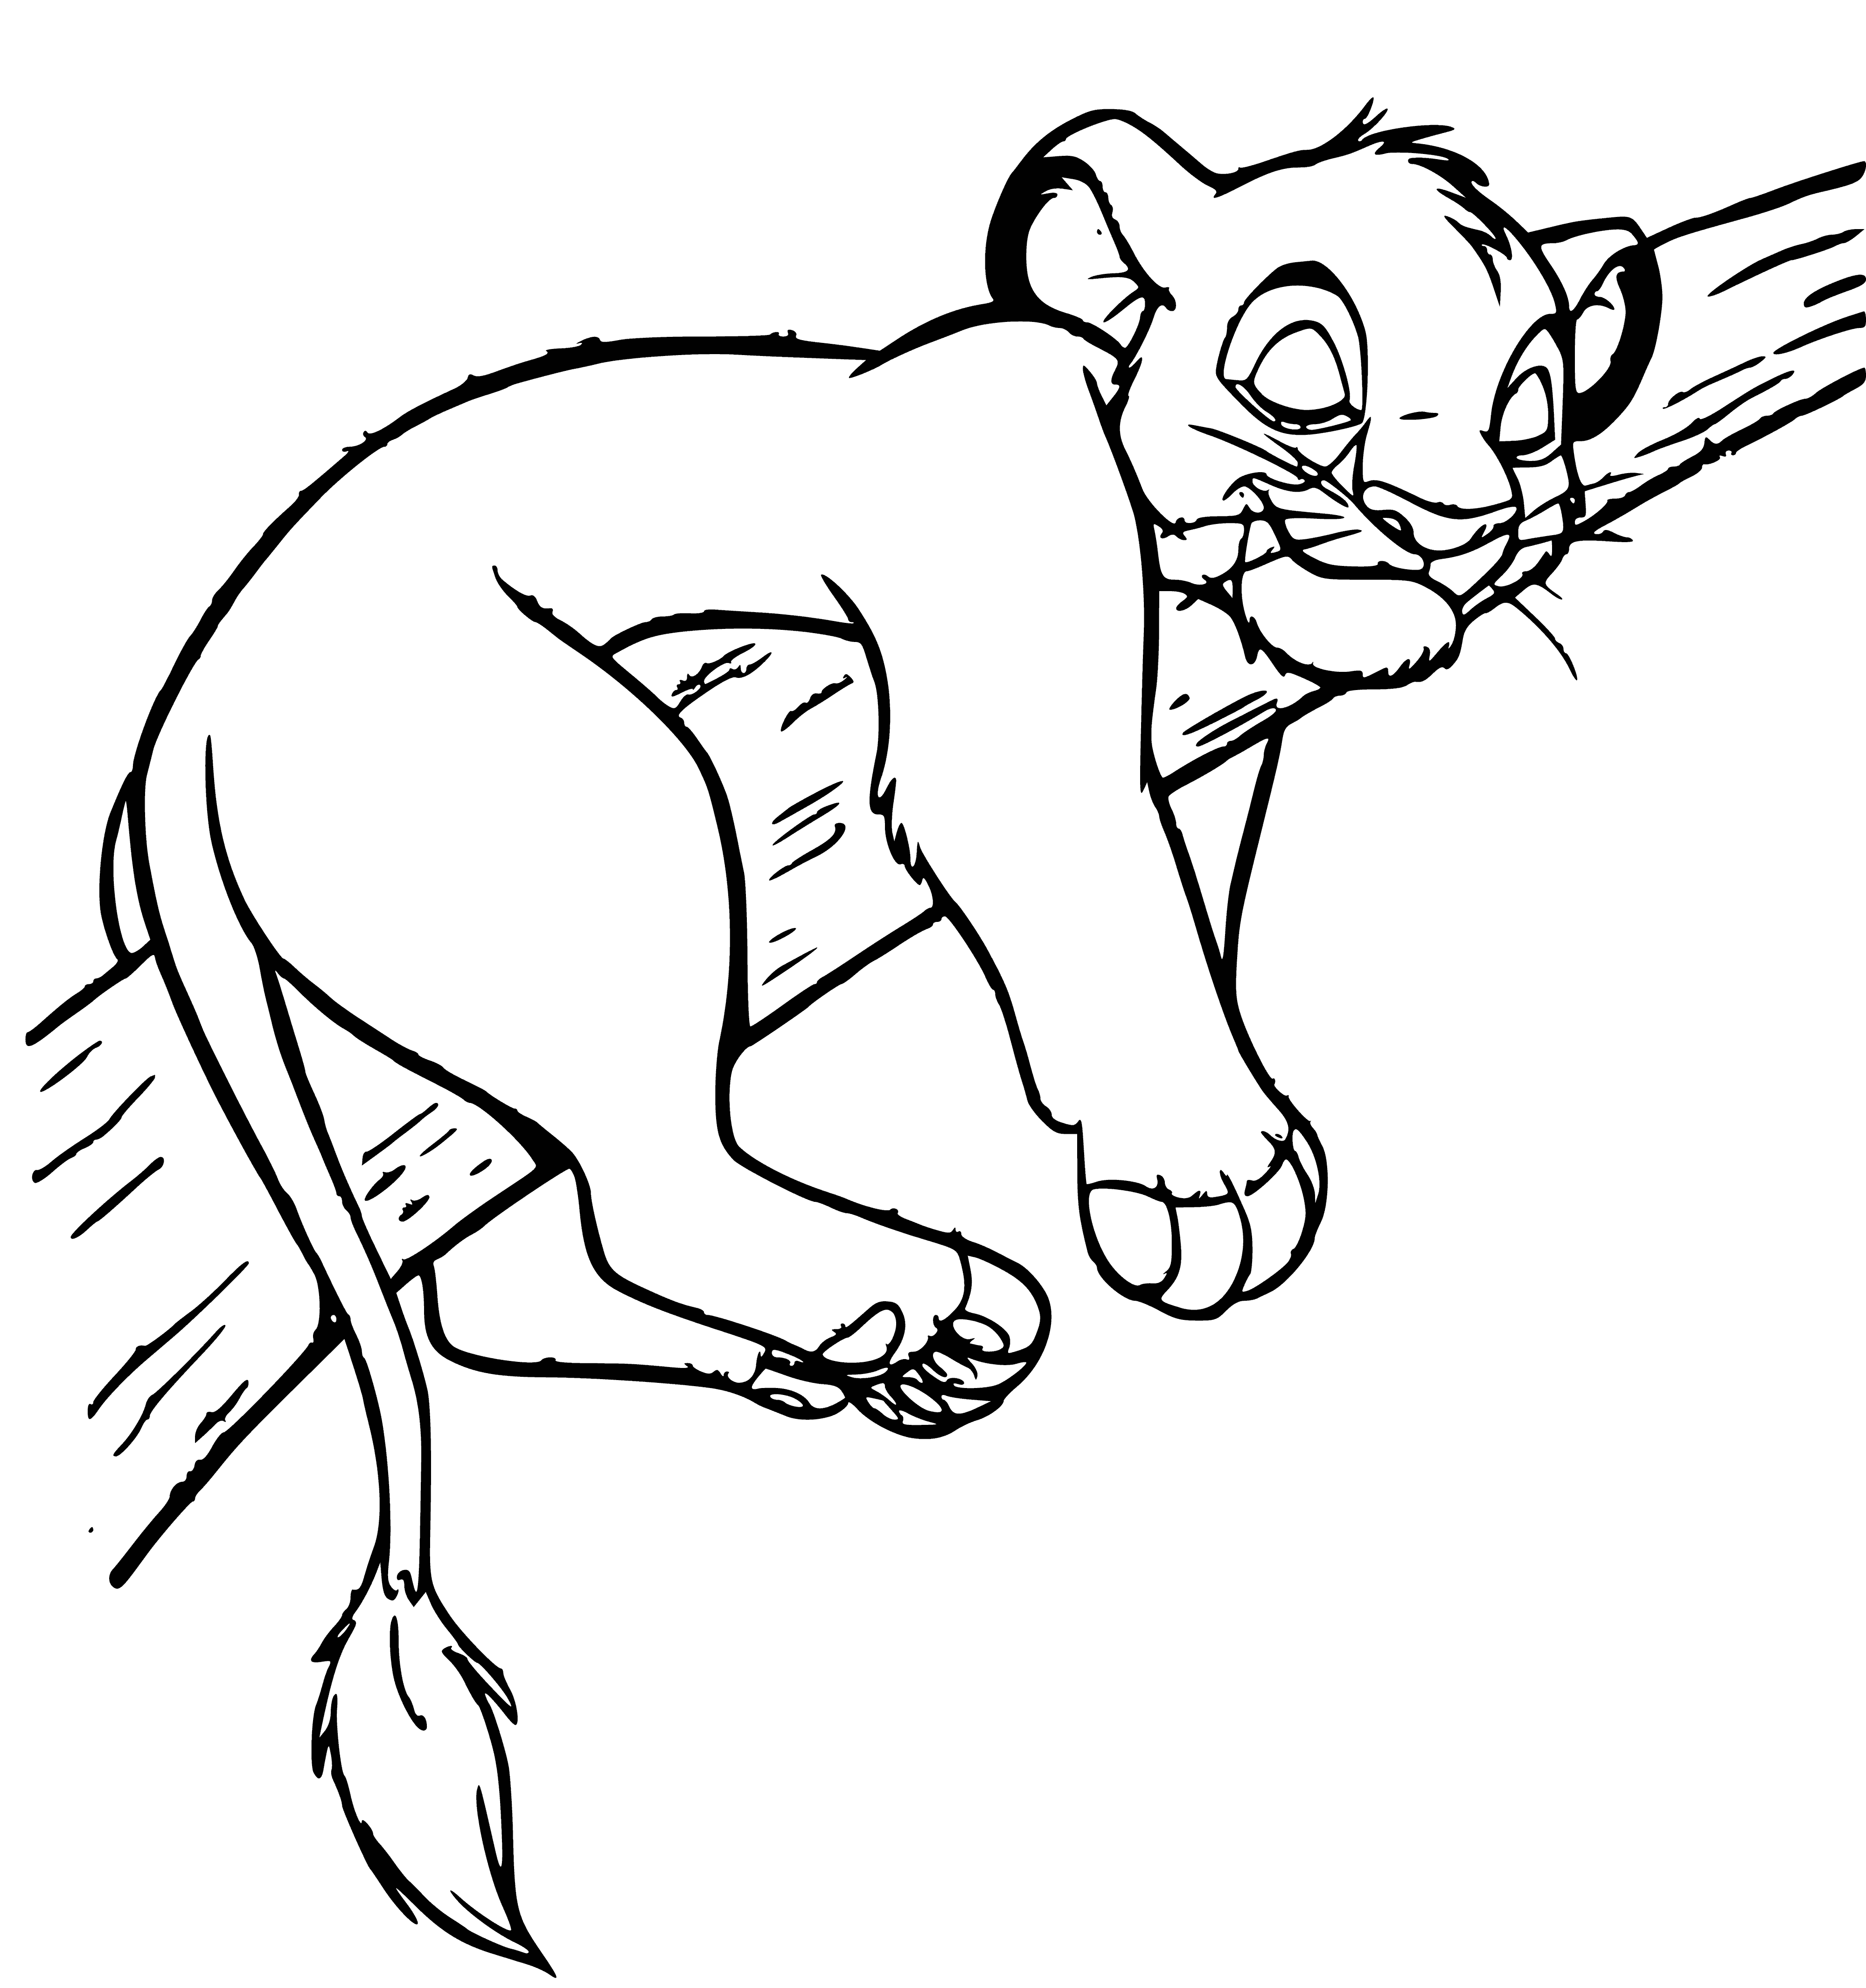 coloring page: Simba on tree, a lion w/brown mane looking left - the perfect coloring page for any young artist! #coloringpage #Simba